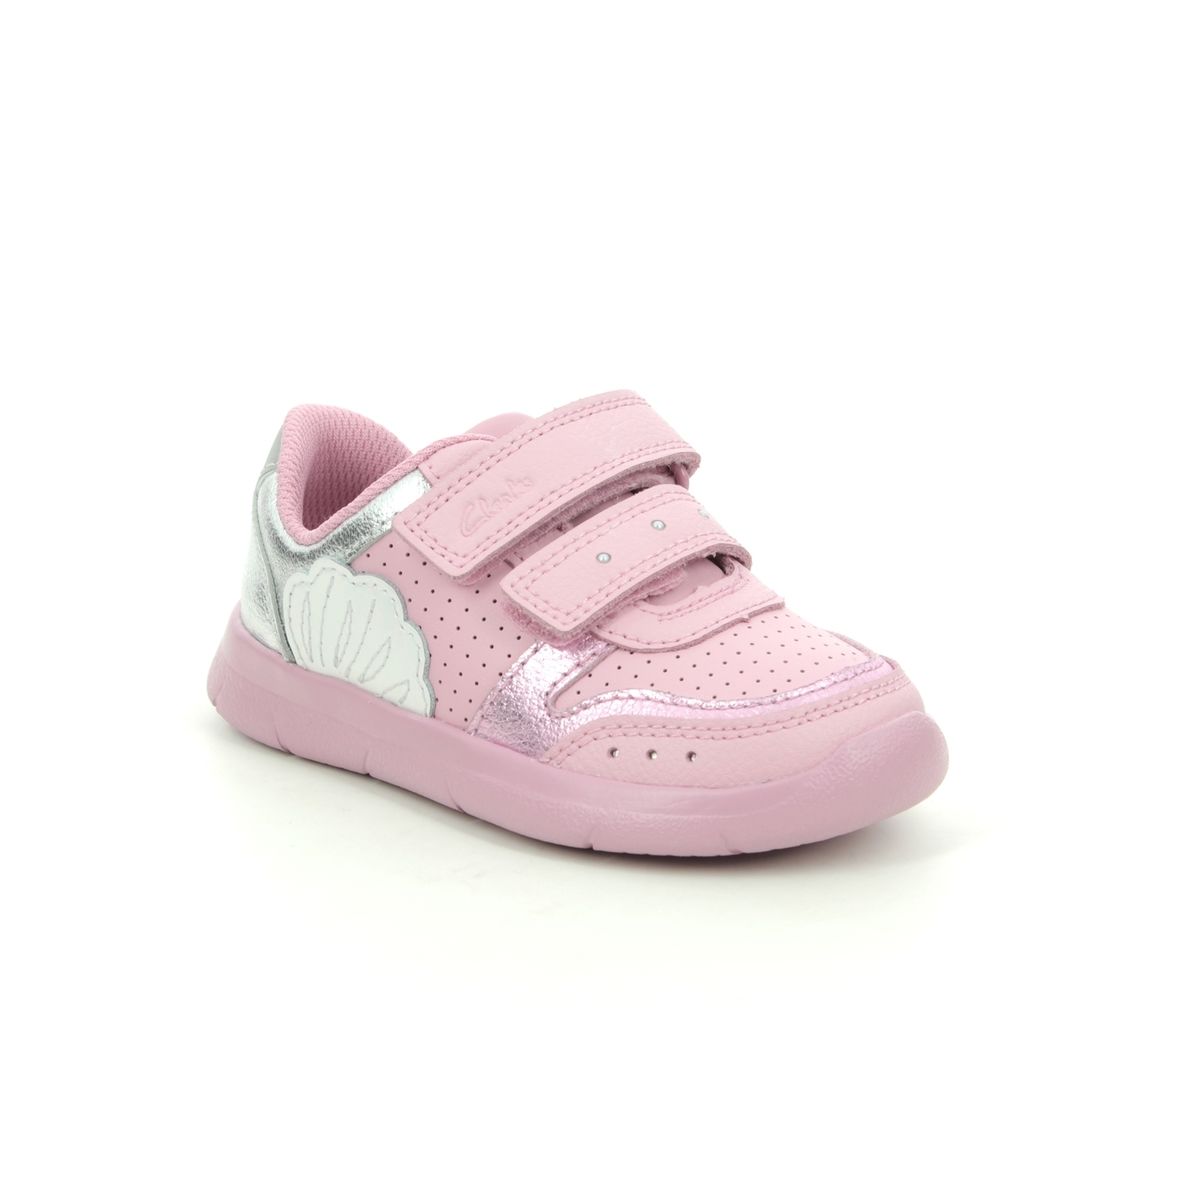 Clarks Ath Shell T F Fit Pink Leather 